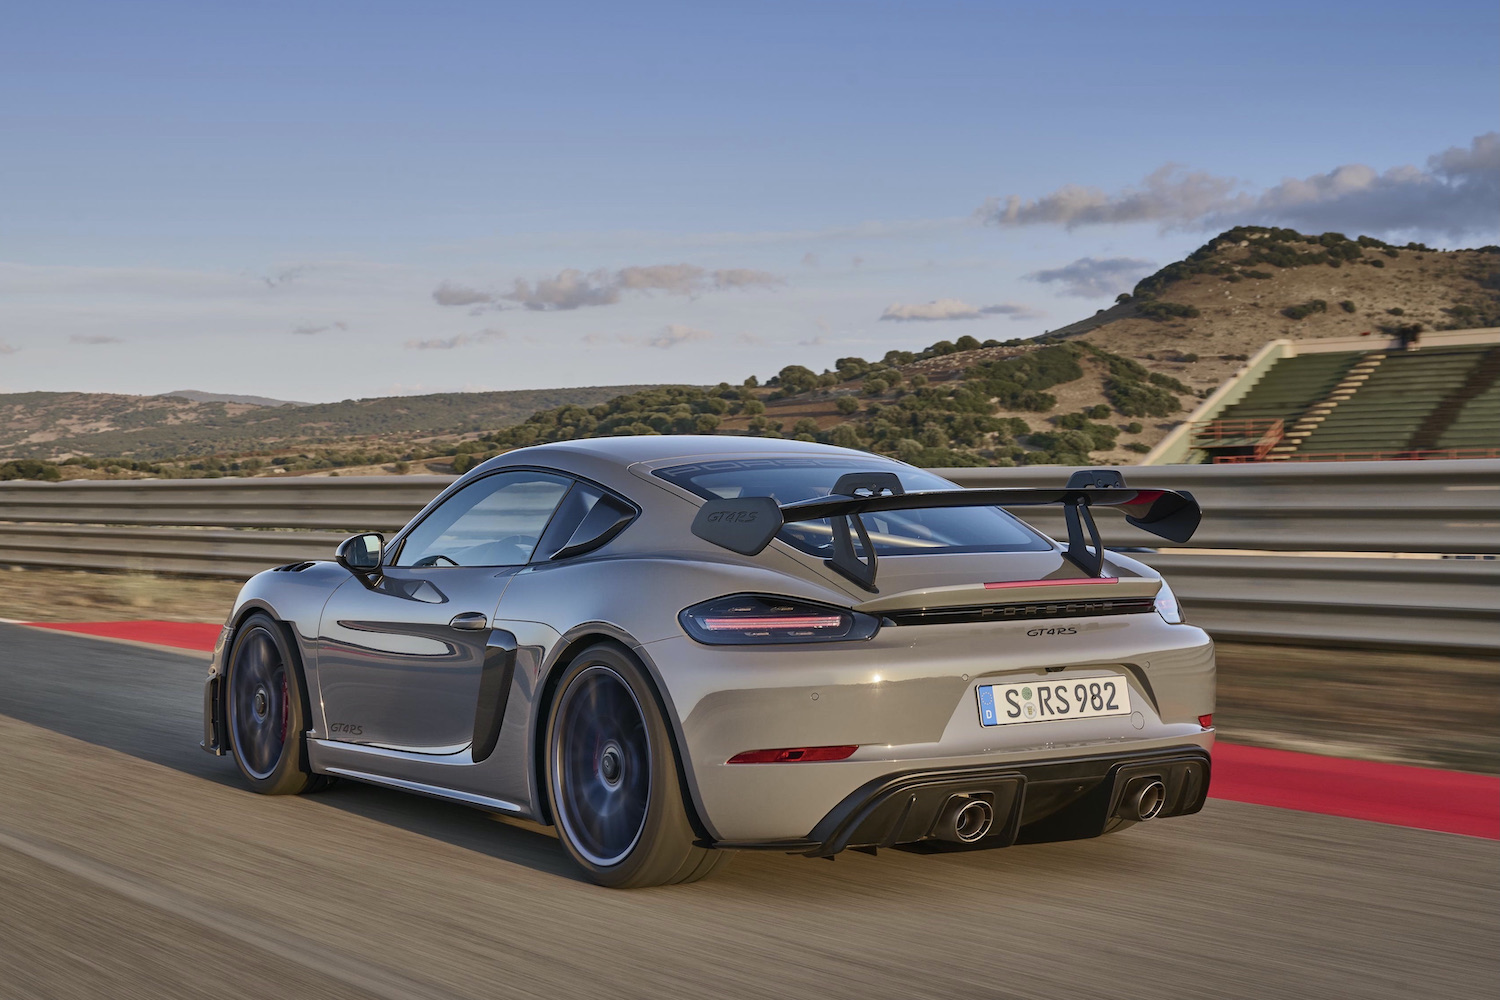 Porsche 718 Cayman GT4 RS rear end angle from driver's side on track at sunset.